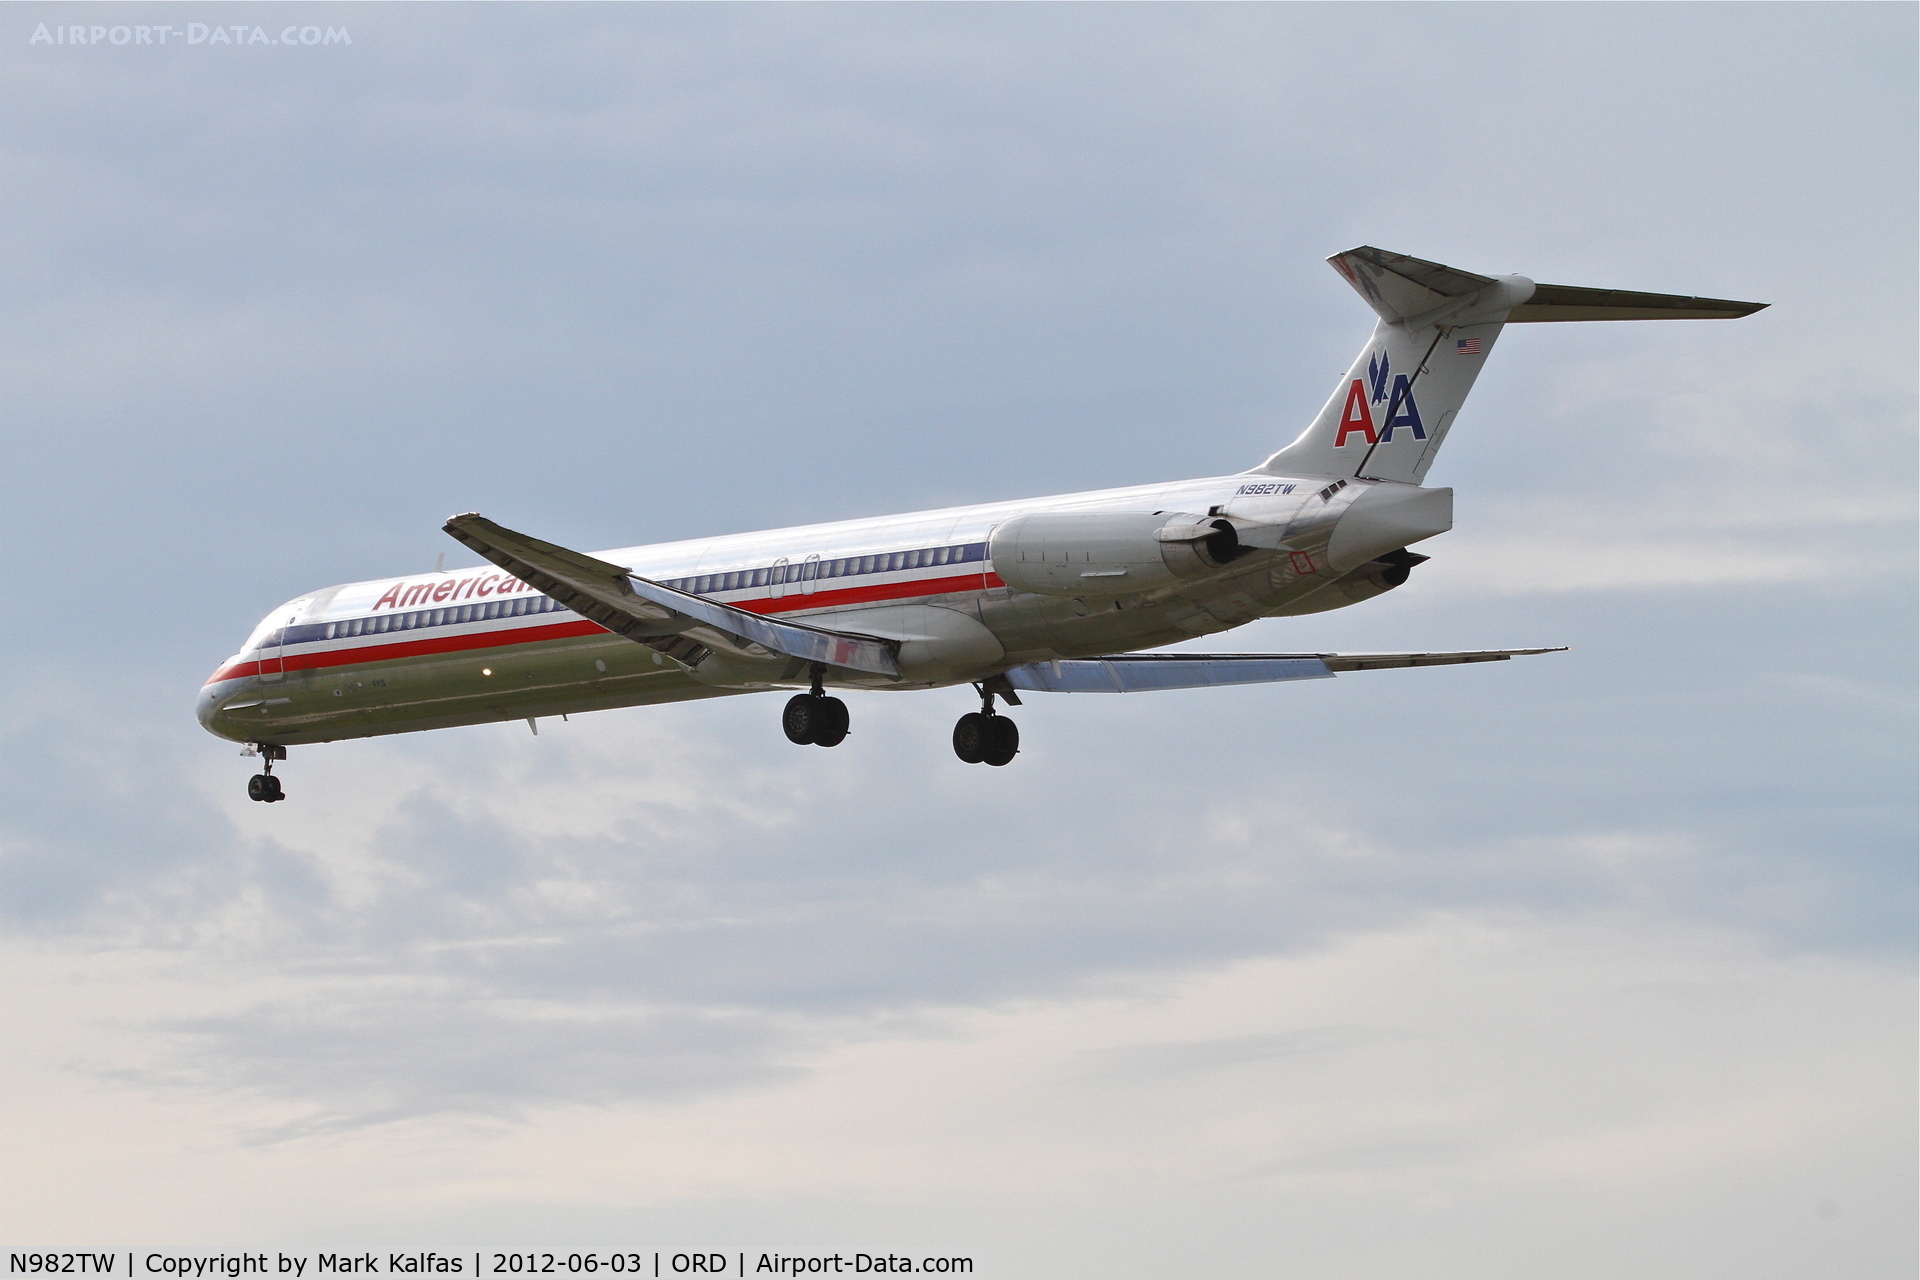 N982TW, 1999 McDonnell Douglas MD-83 (DC-9-83) C/N 53632, American Airlines Mcdonnell Douglas DC-9-83, AAL2321 arriving from Dallas-Fort Worth/KDFW, RWY 28 approach KORD.